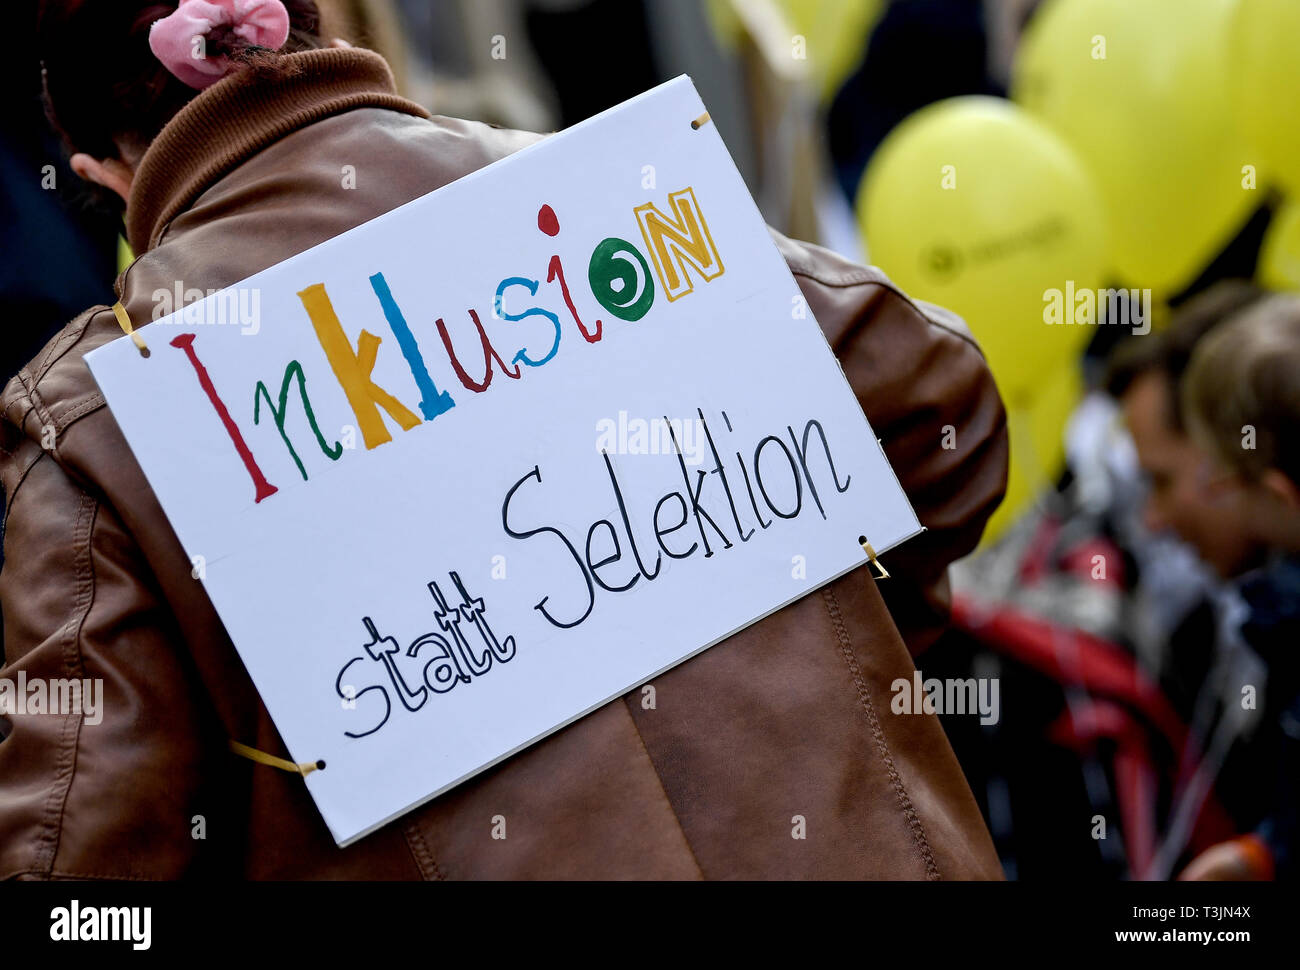 Berlin, Germany. 10th Apr, 2019. A sign with the inscription 'Inclusive statt Selektion' is shown during a demonstration on the occasion of the Bundestag debate on blood tests for pregnant women, for example for a Down's syndrome of the child. The Bundestag wants to deal with such blood tests this Thursday. Credit: Britta Pedersen/dpa-Zentralbild/dpa/Alamy Live News Stock Photo